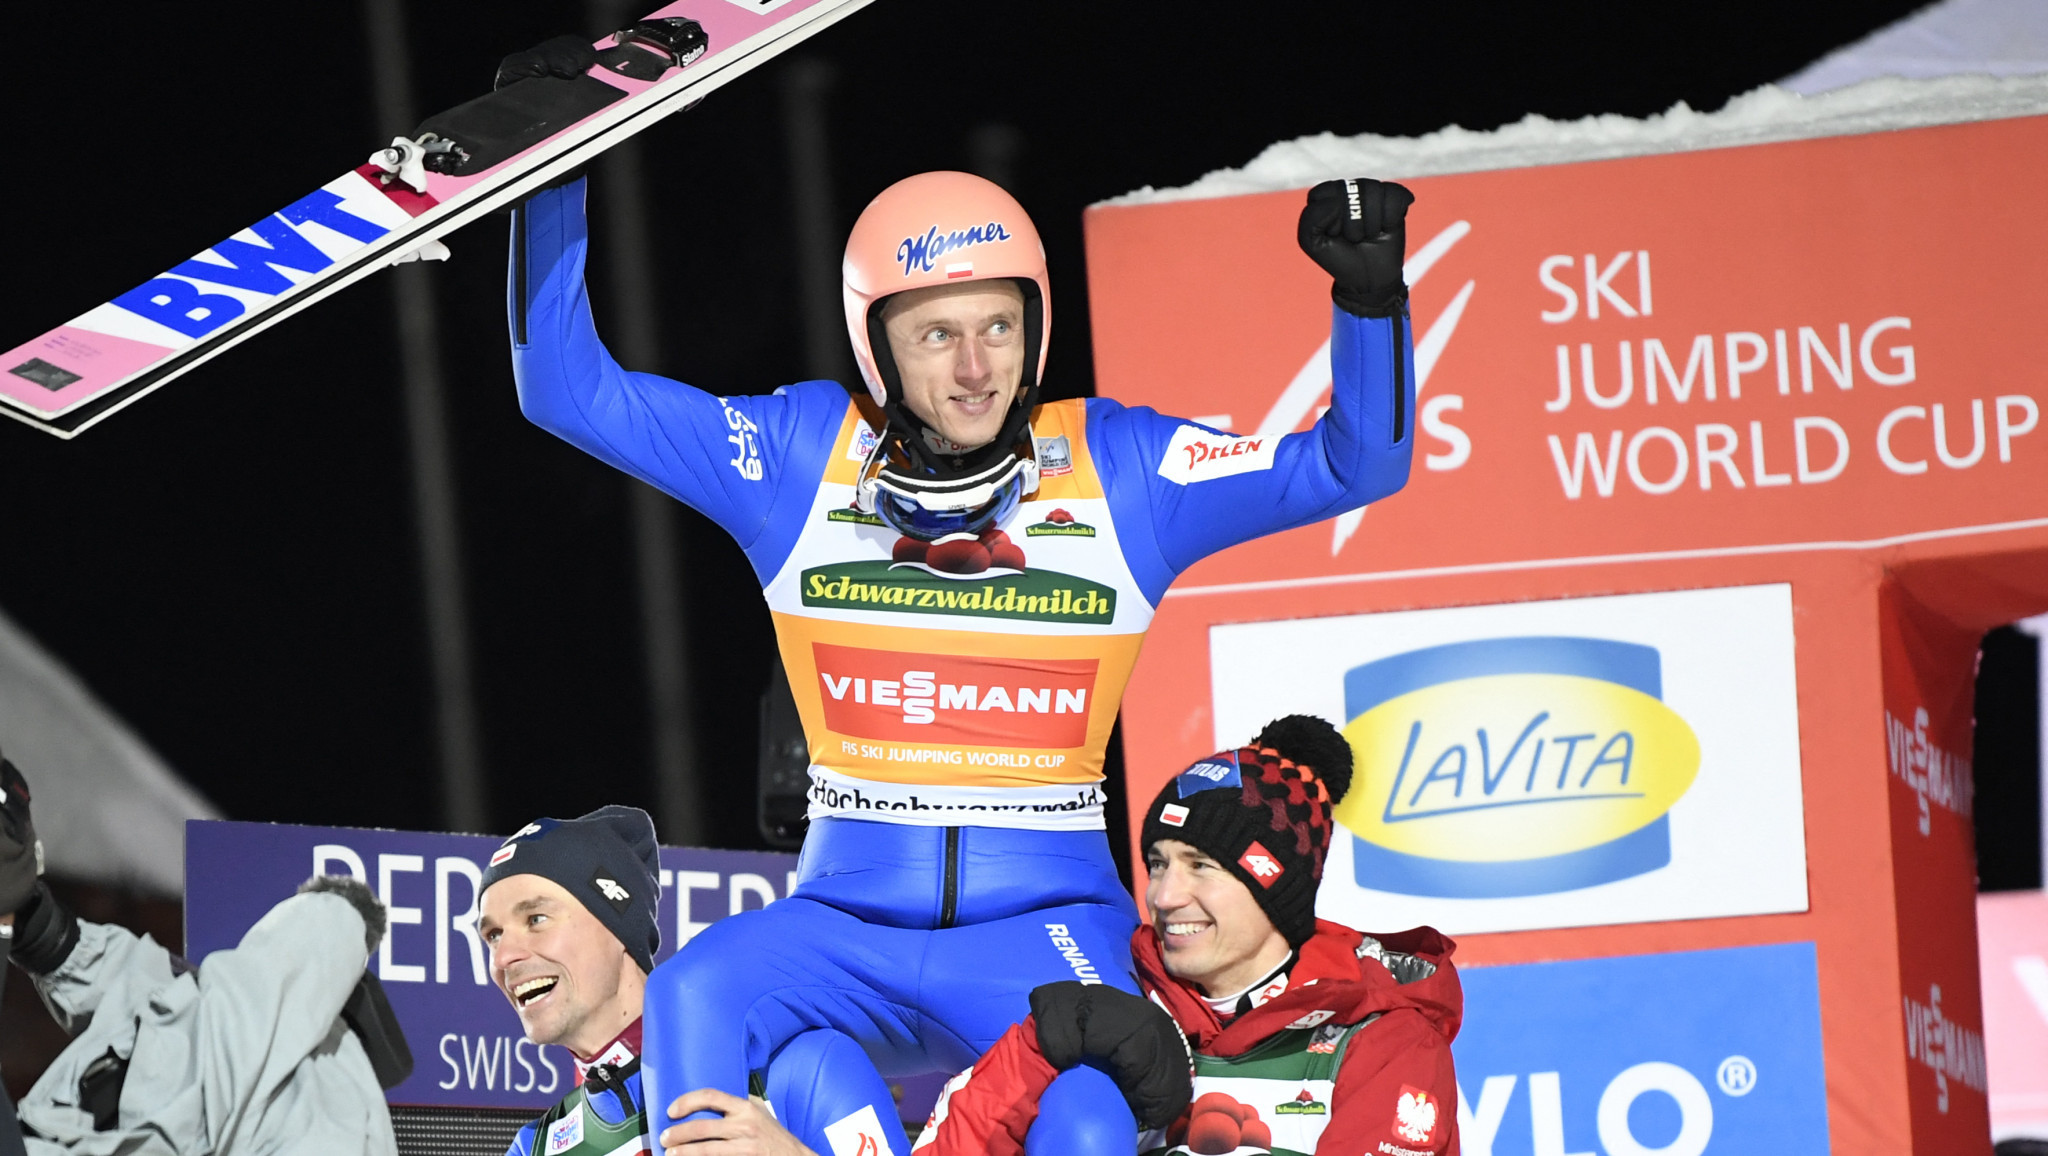 Kubacki and Althaus leave Titisee-Neustadt with Ski Jumping World Cup wins and overall leads